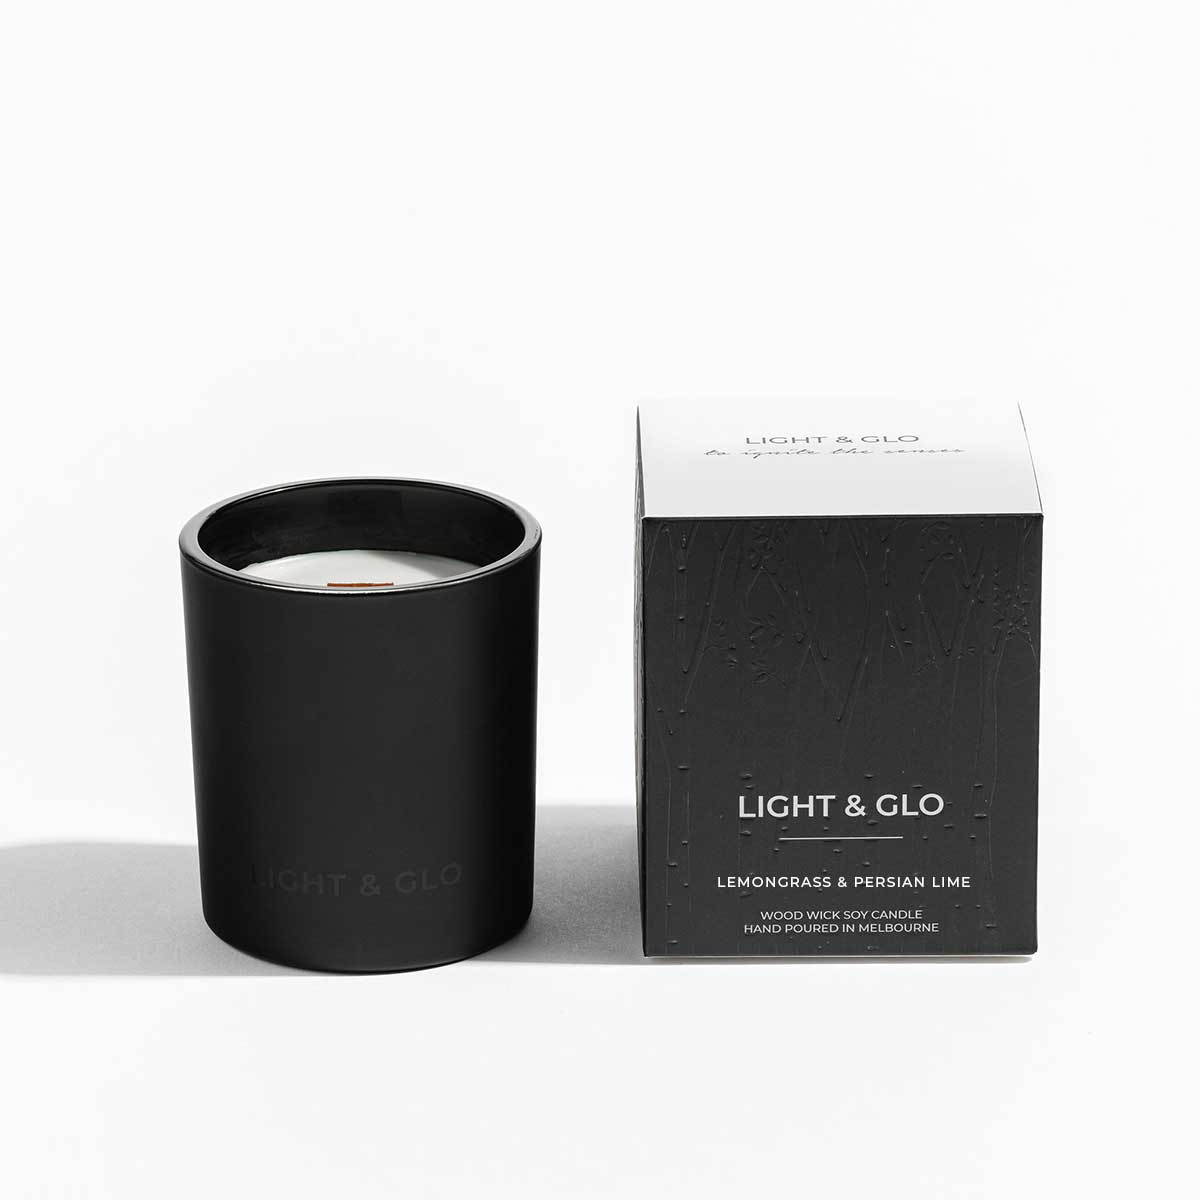 Lemongrass & Persian Lime - Monochrome Large 300g Candle | Luxury Candles & Home Fragrances by Light + Glo